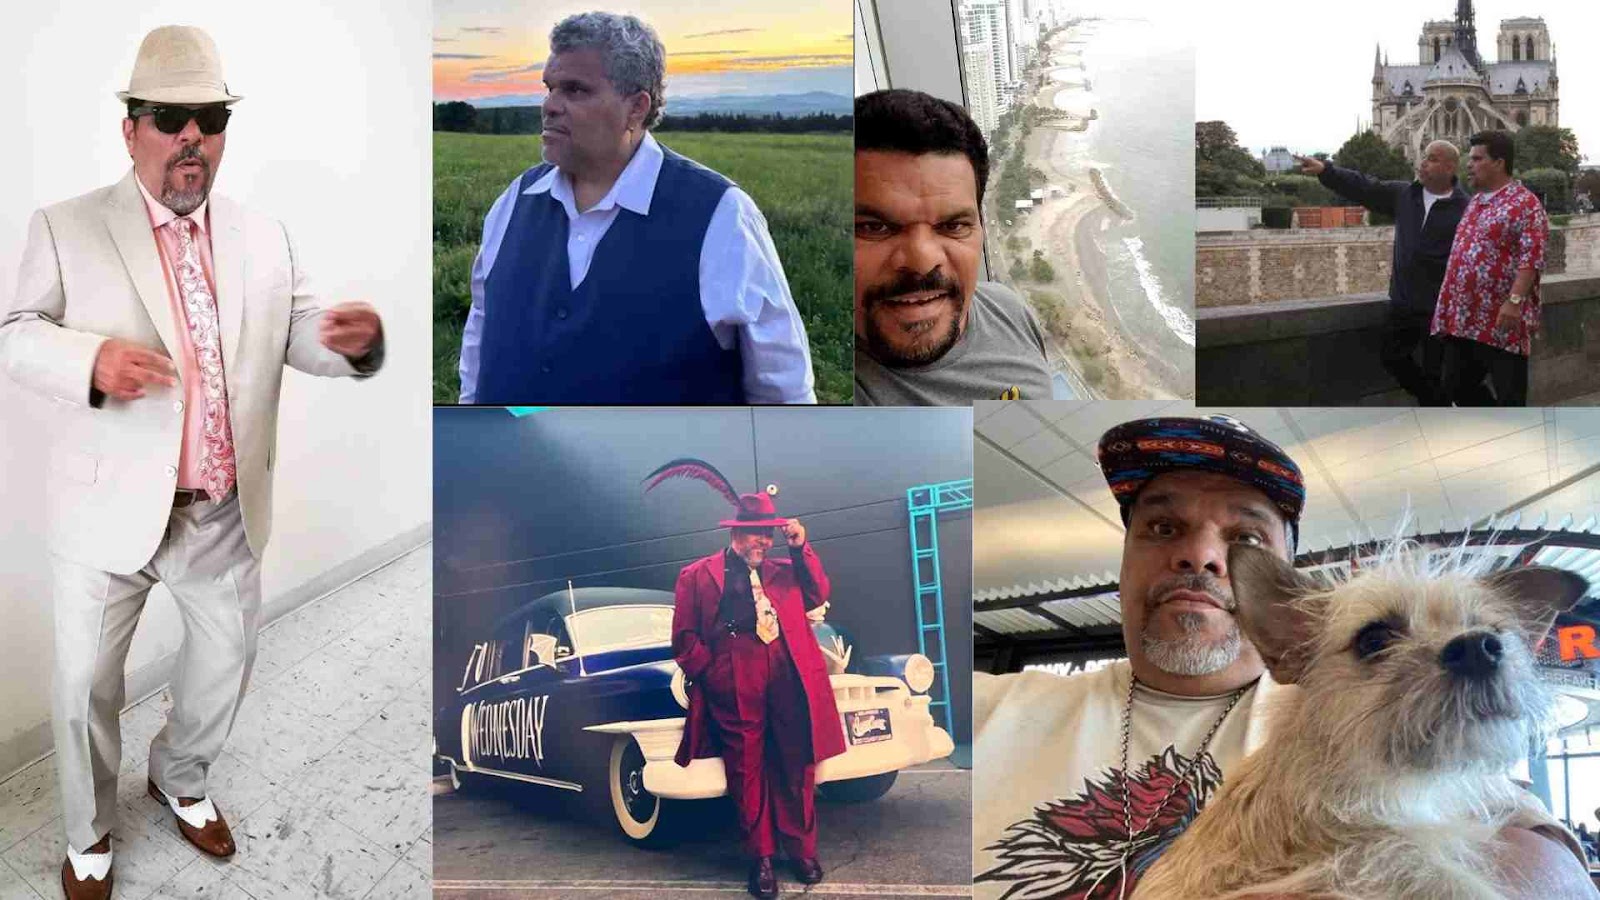 Where Did Luis Guzman Spend His Earnings?